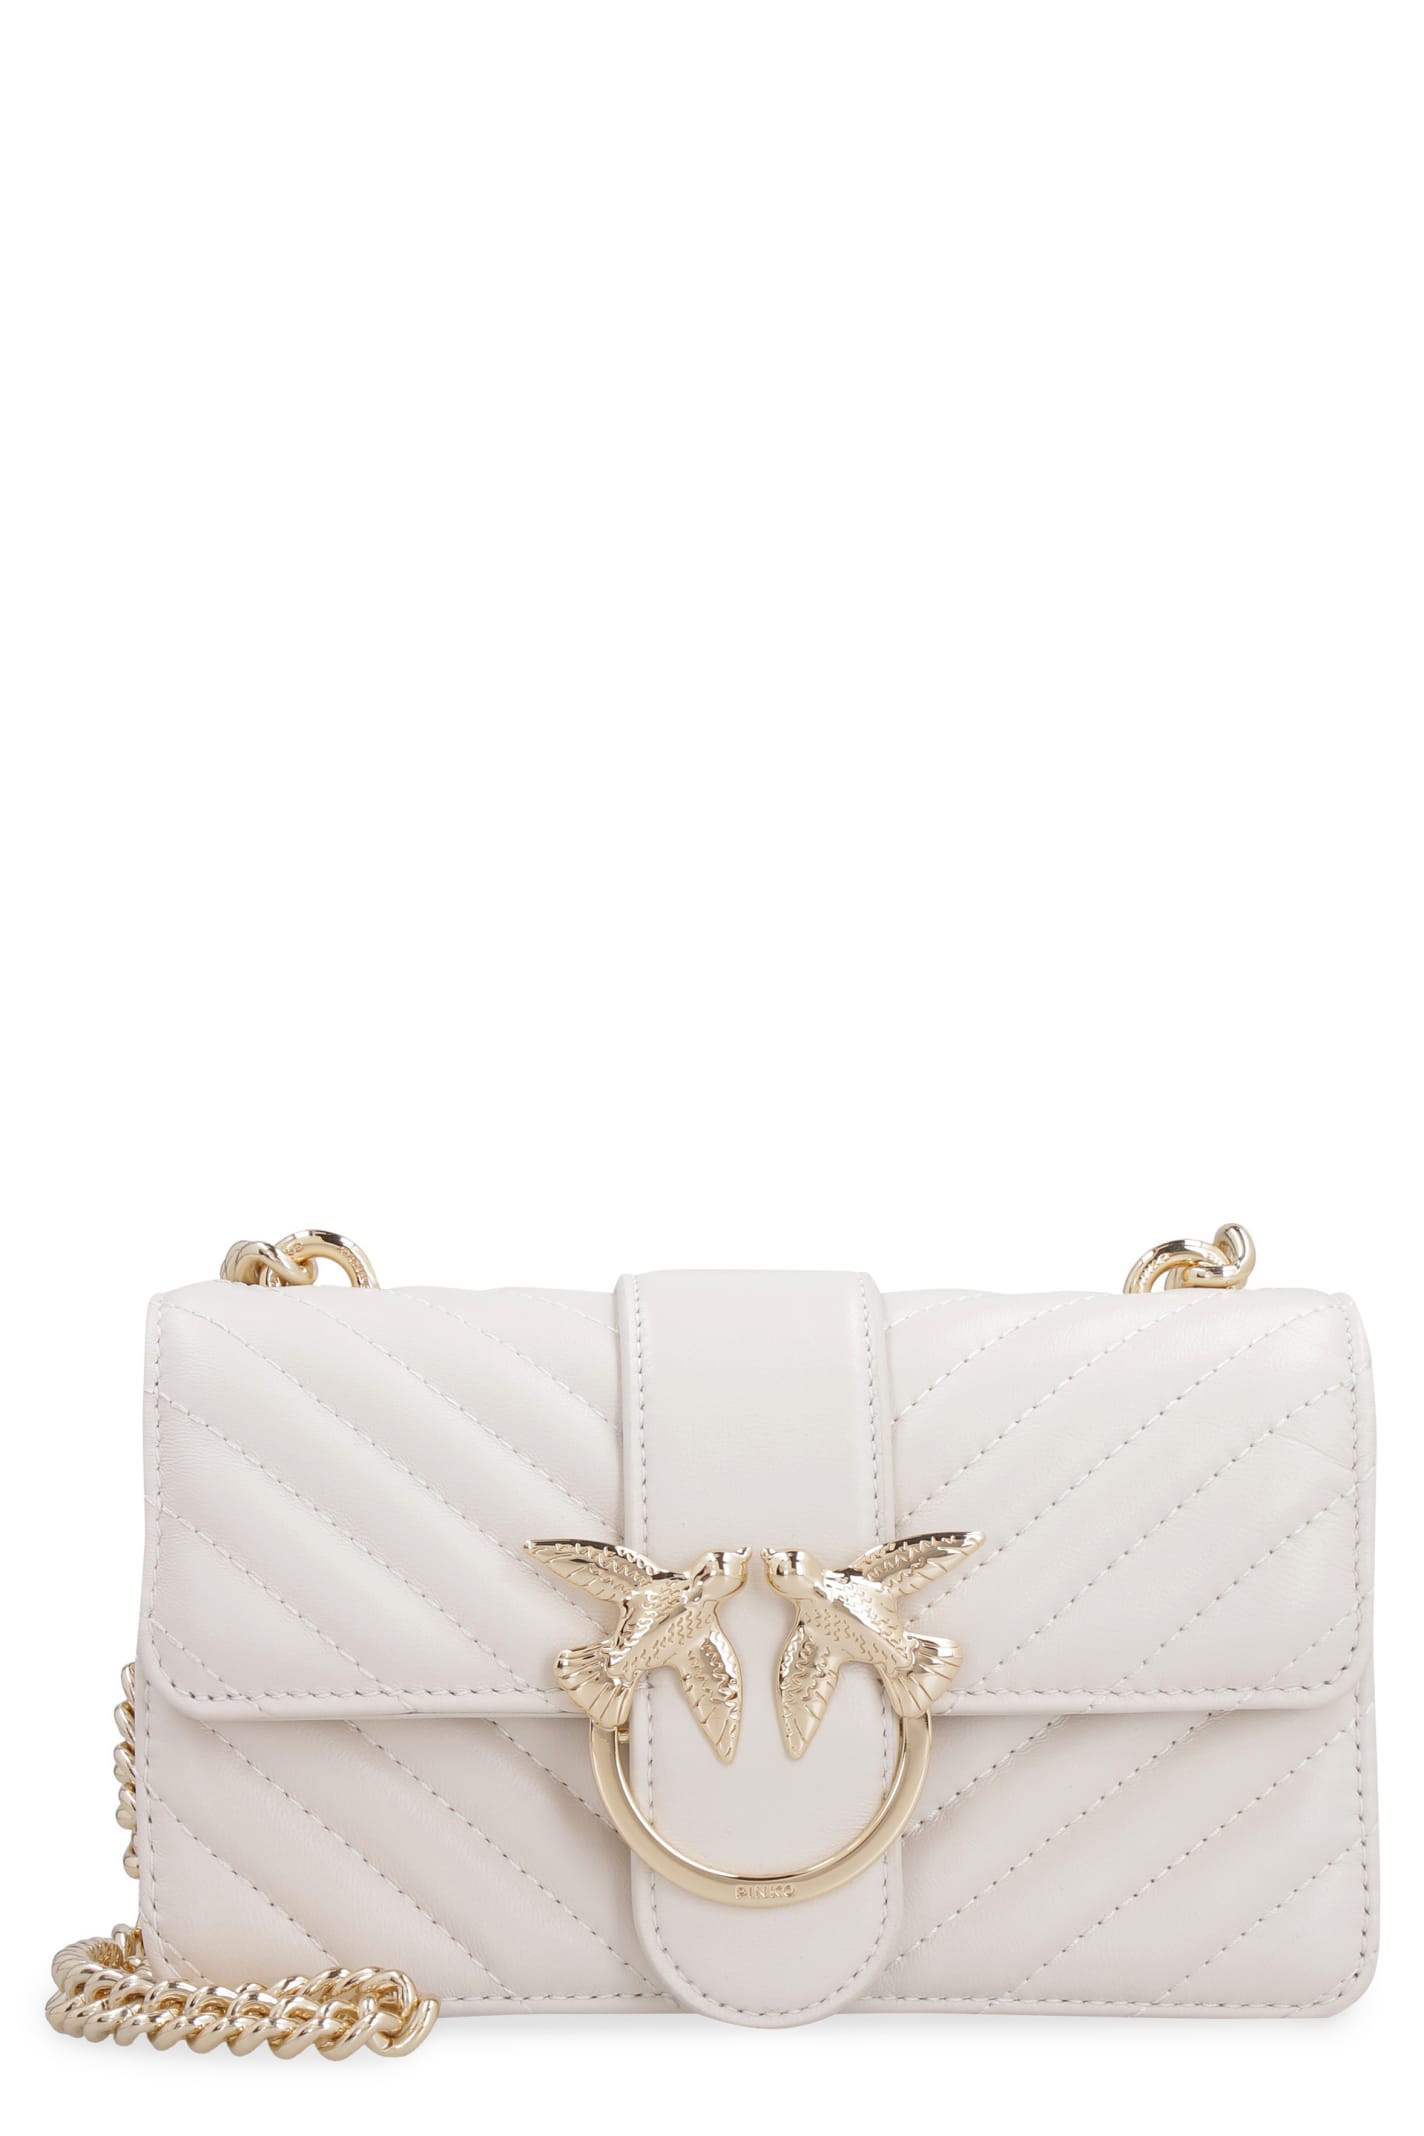 PINKO MINI LOVE MIX QUILTED LEATHER BAG,11251413